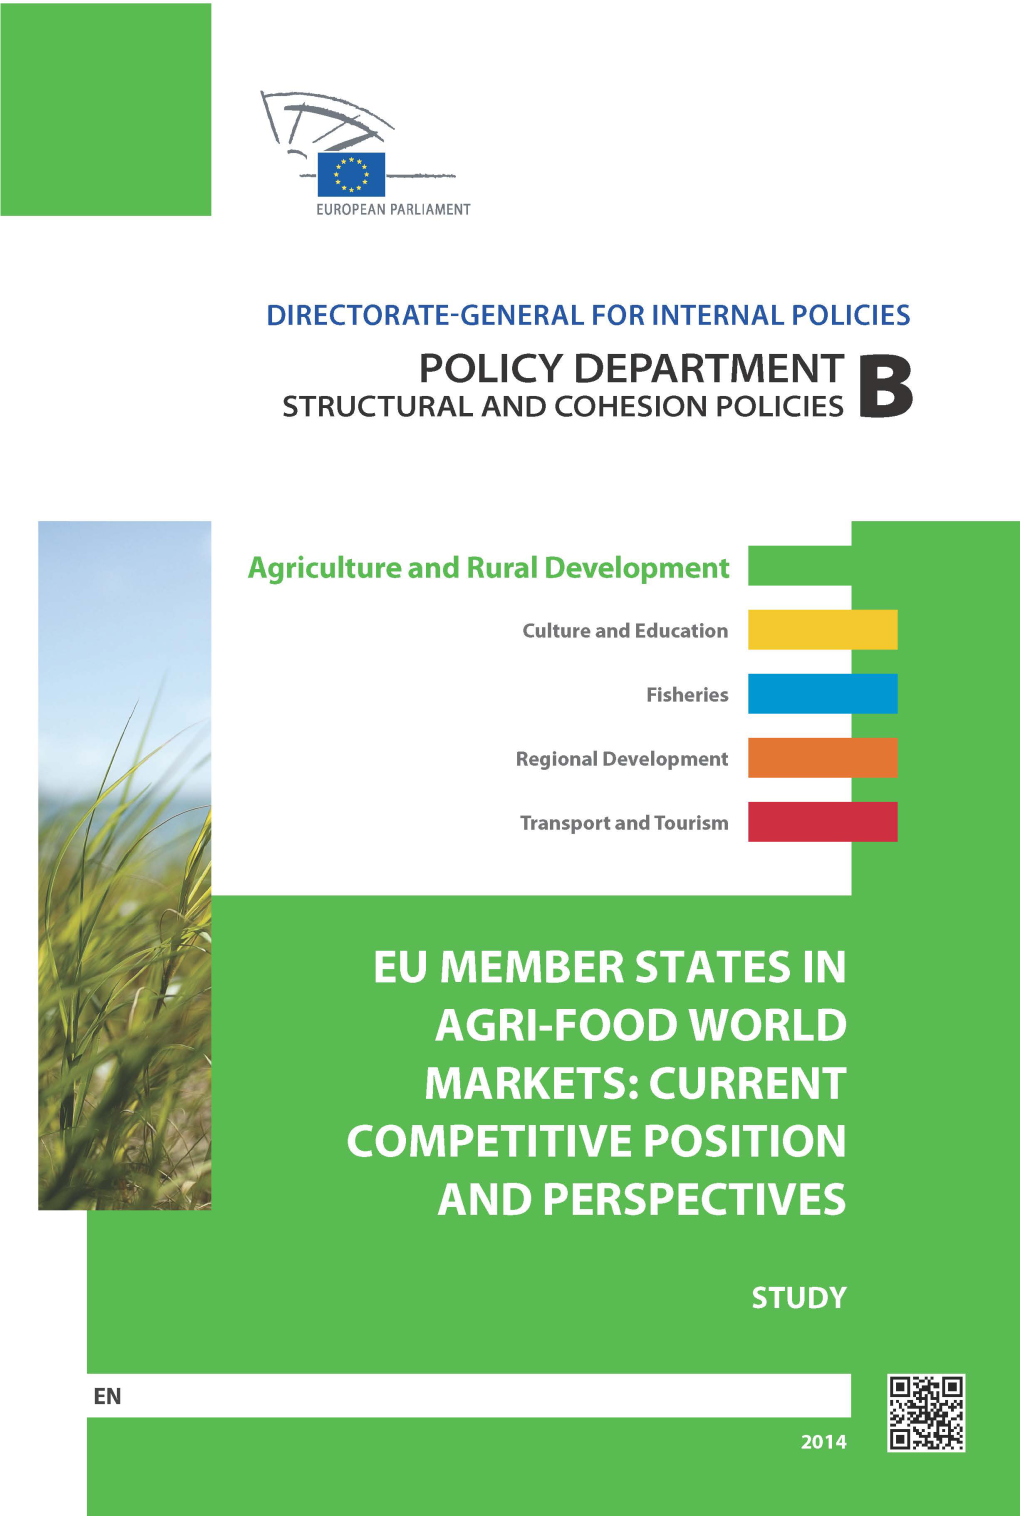 Eu Member States in Agri-Food World Markets: Current Competitive Position and Perspectives